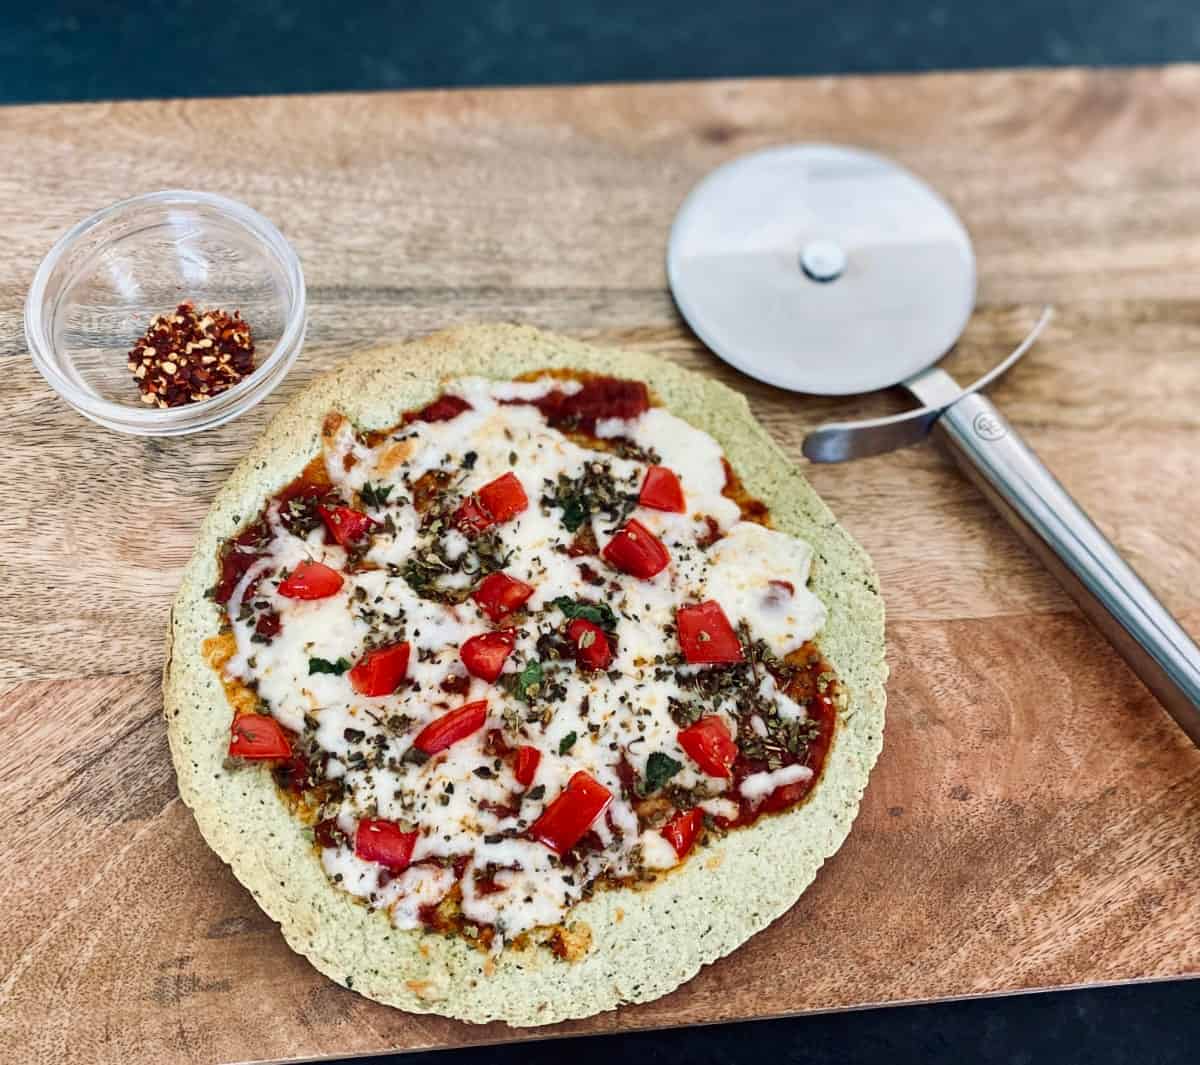 Tortilla pizza on cutting board with pizza cutter and crushed red pepper flakes.